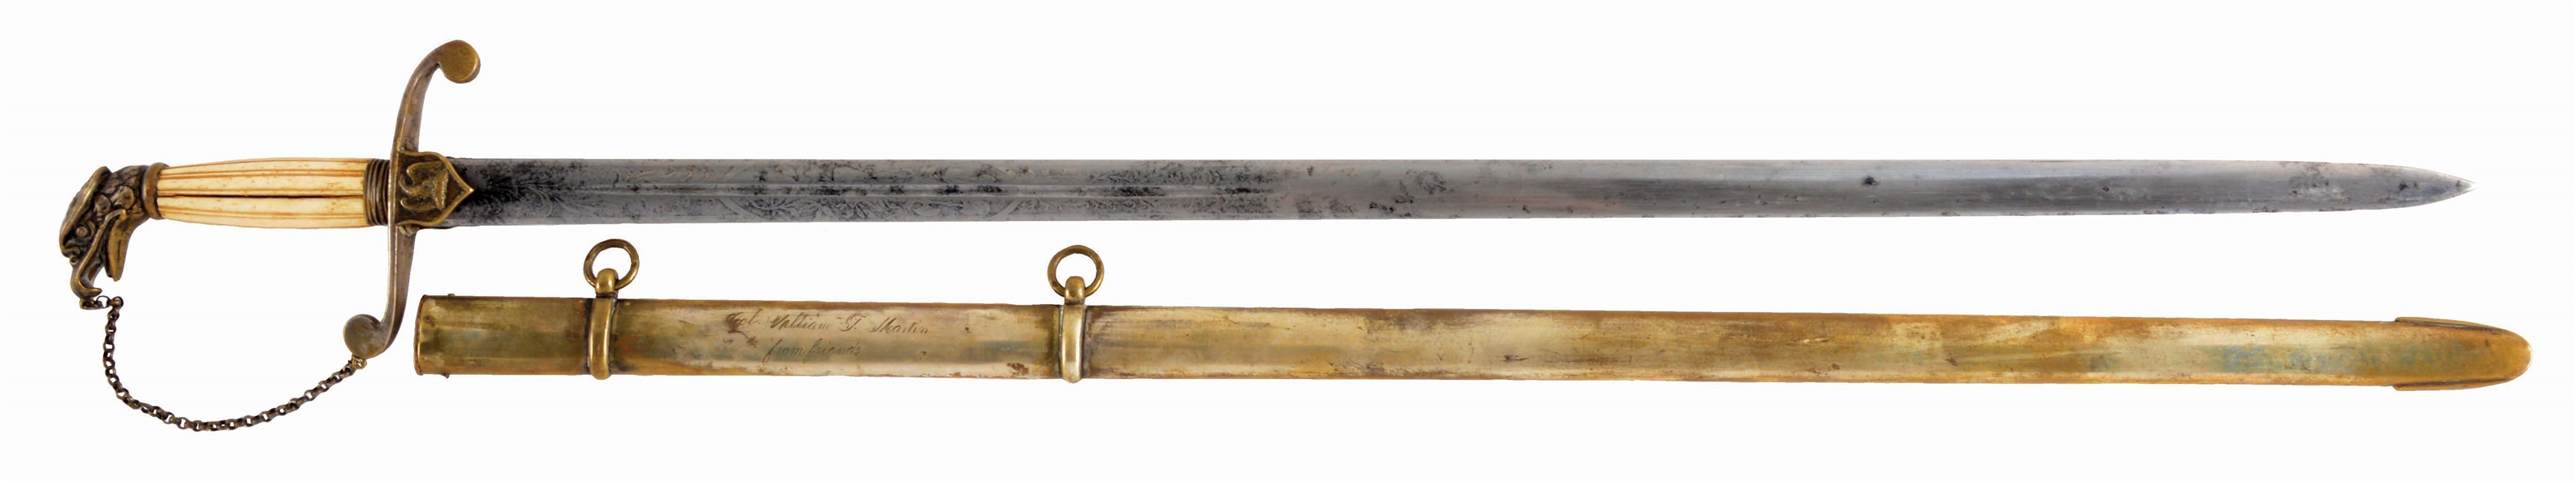 AN EAGLE HEAD OFFICERS SWORD WITH REEDED BONE GRIP AND SILVER PLATED SCABBARD WITH PRESENTATION TO COLONEL WILLIAM T. MARTIN FROM FRIENDS, CIRCA 1830.